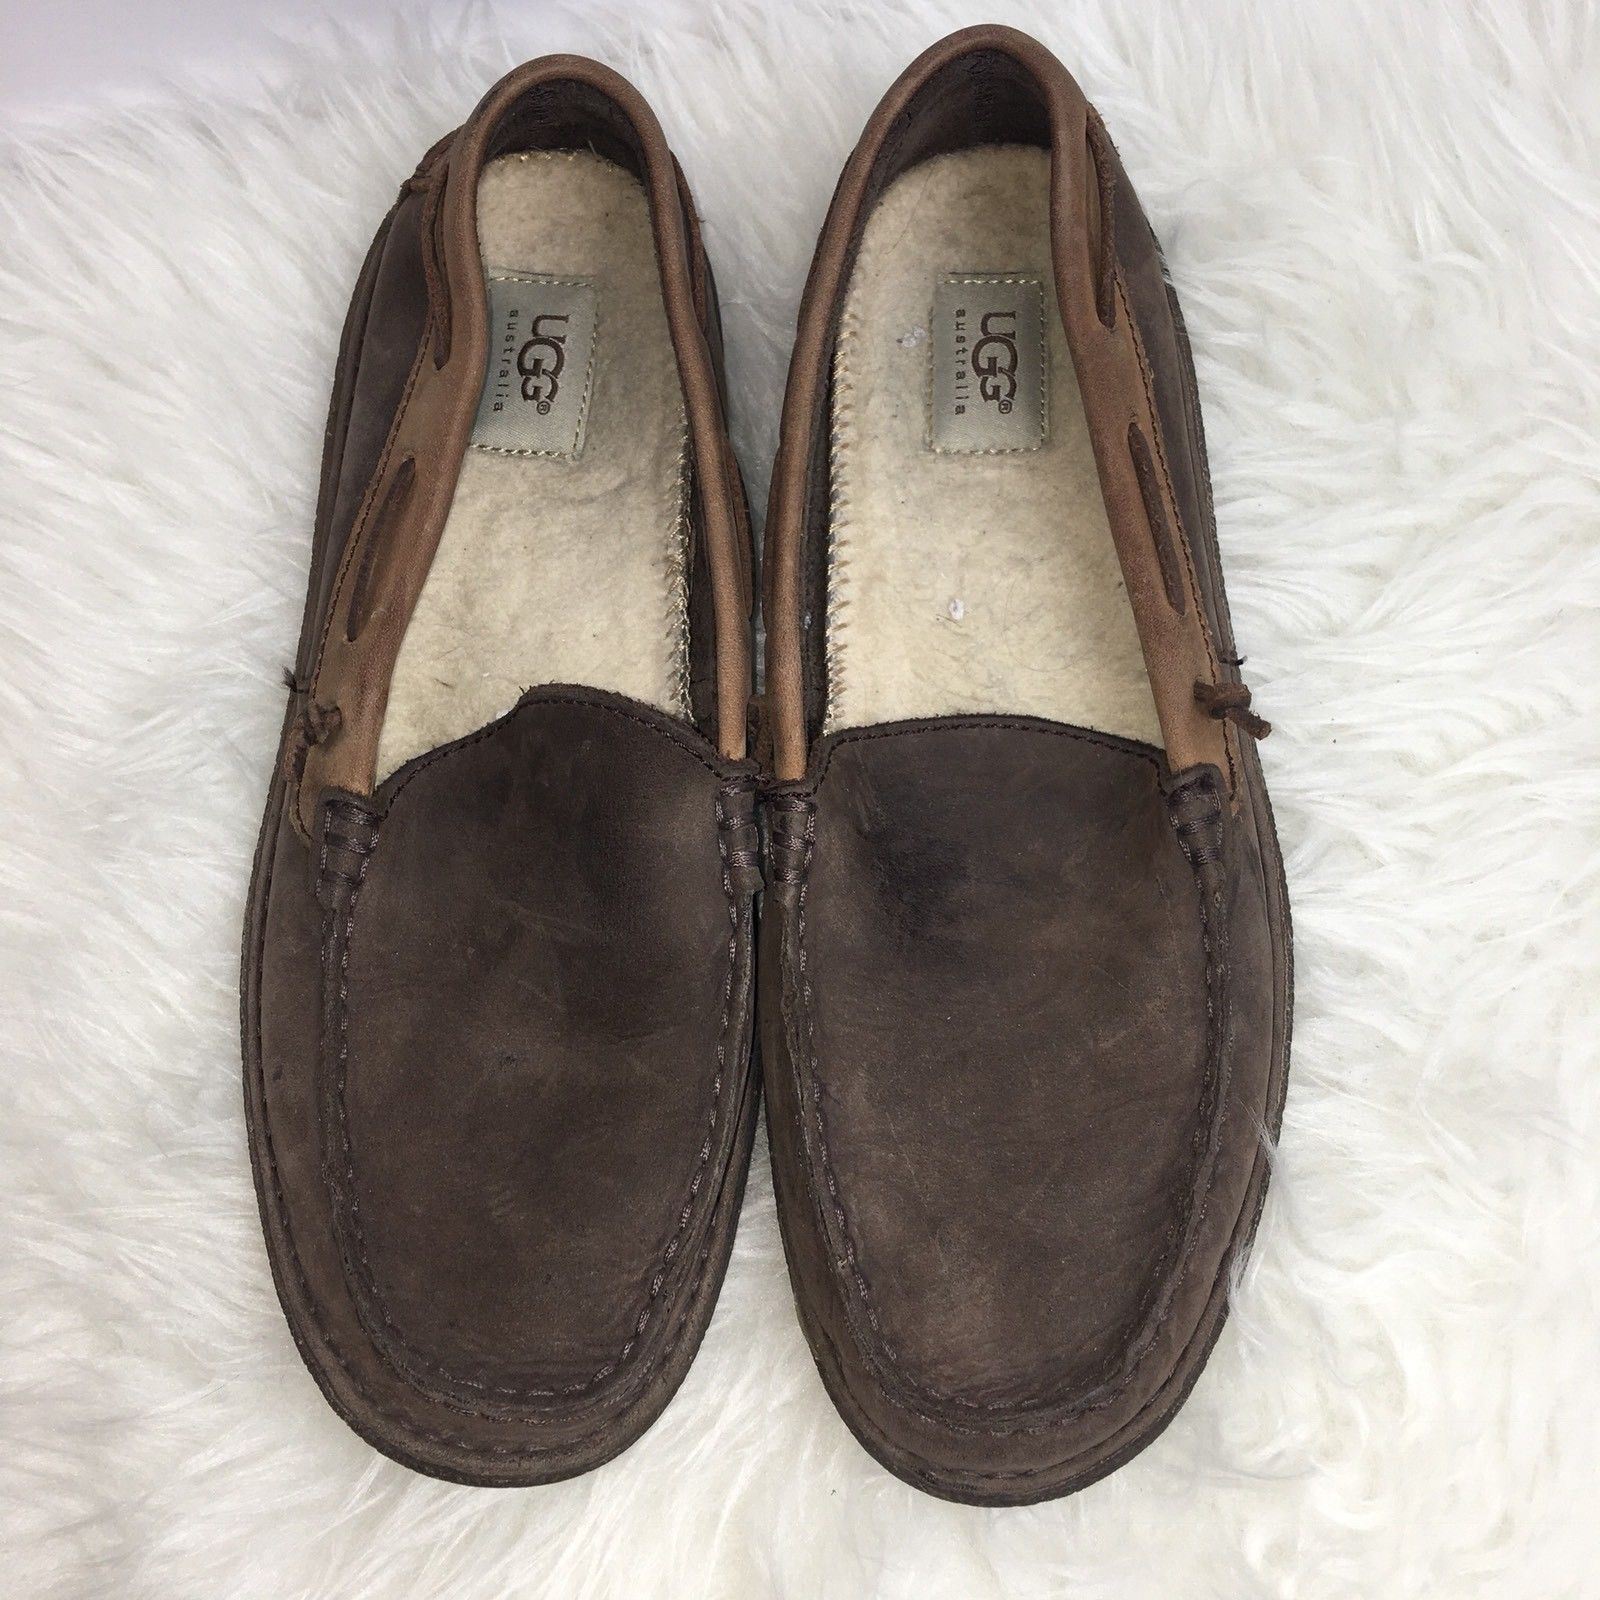 UGG Australia Mens Size 9 Loafers Slip Ons Brown Suede - Casual